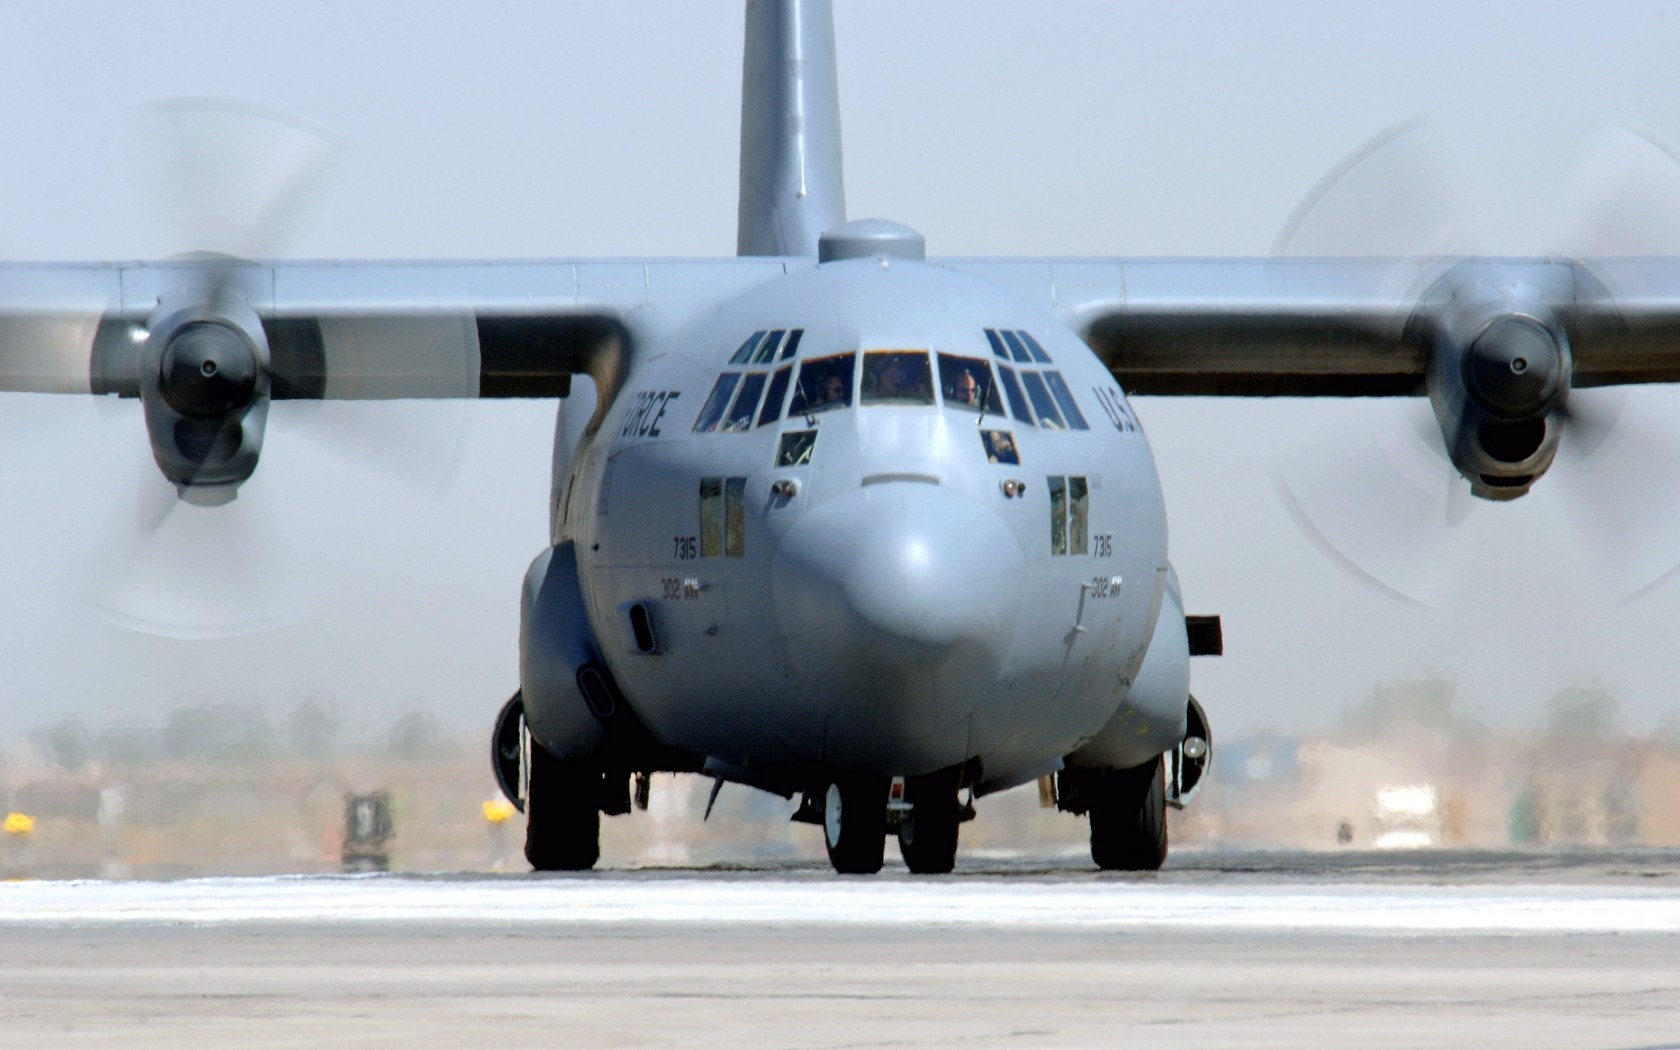 Download High Quality C-130 Hercules Military Airplanes - C 130 Plane - HD Wallpaper 